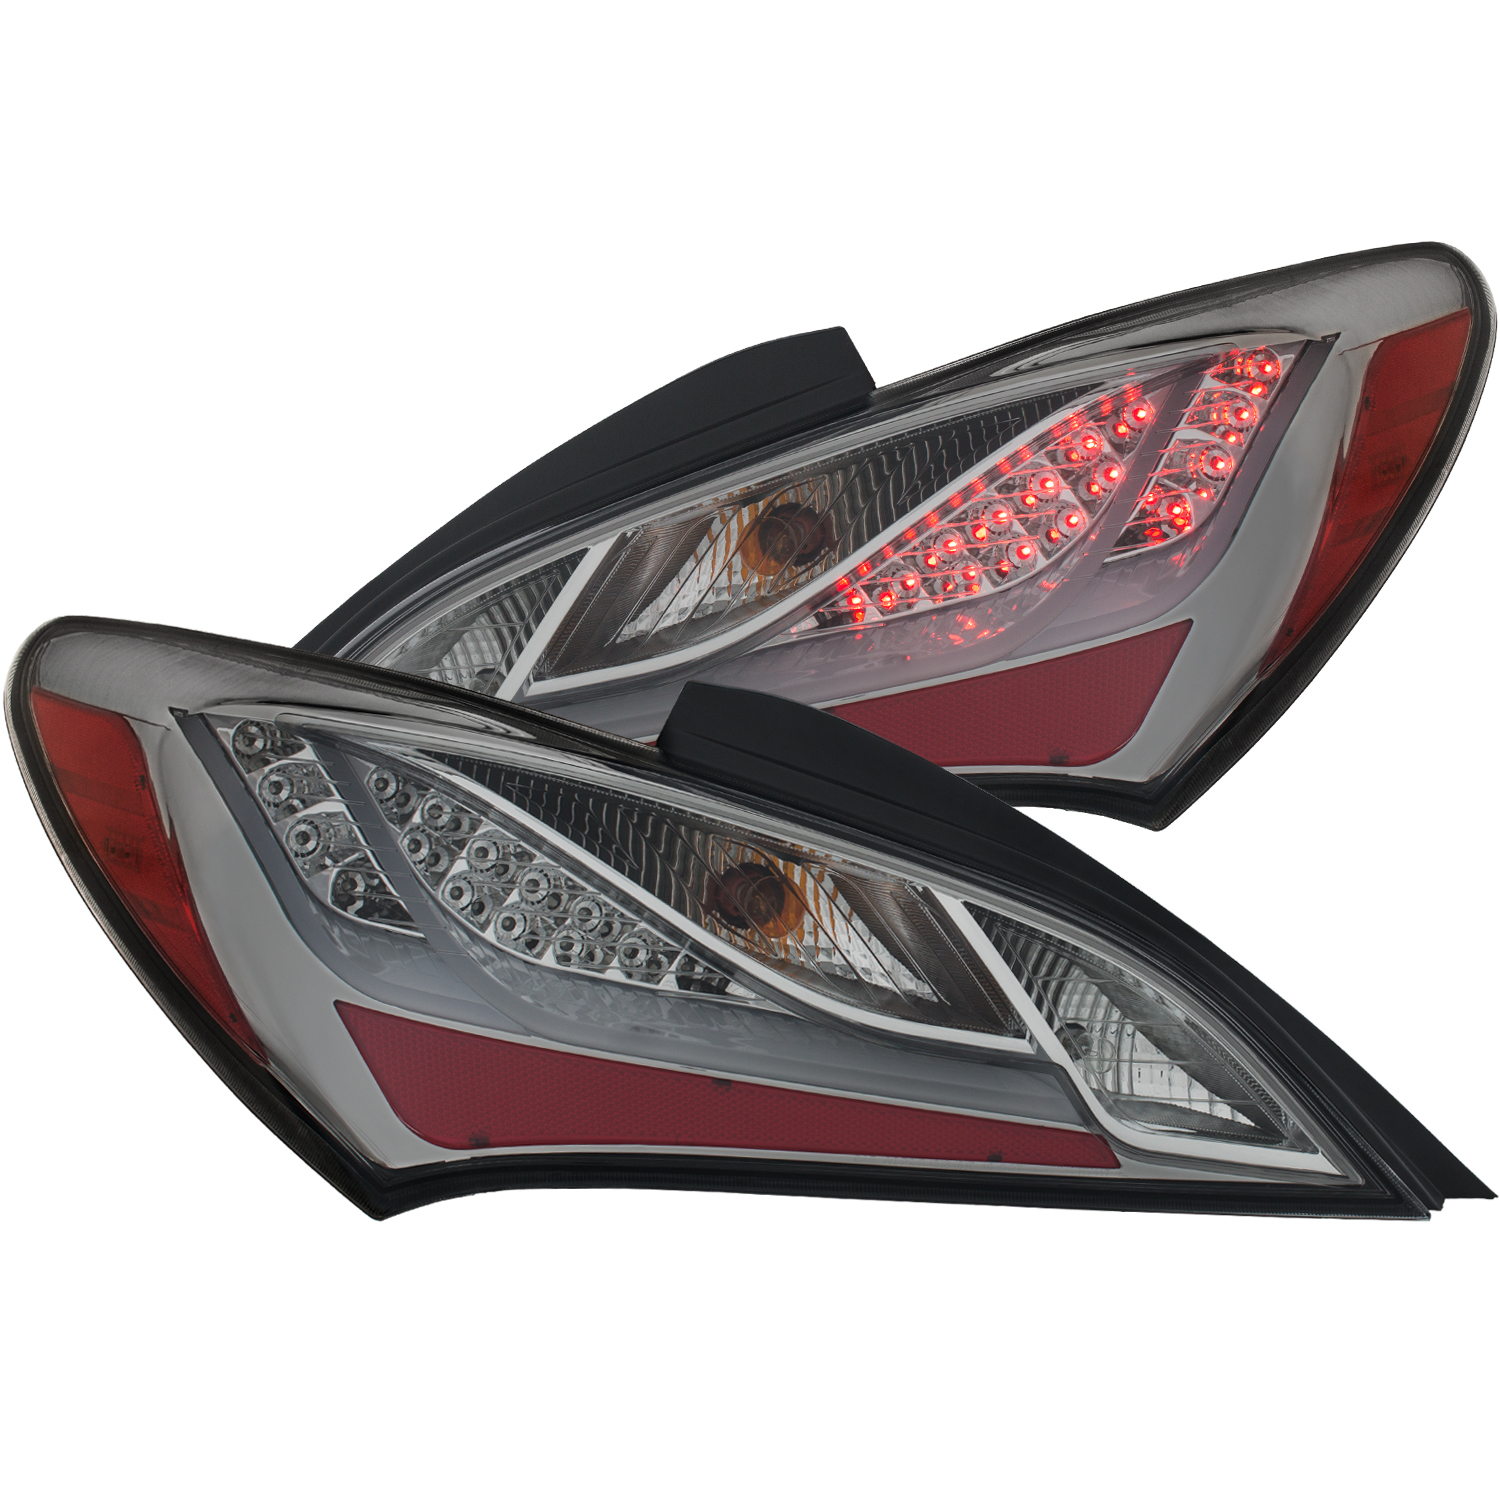 Anzo 321332 LED Tail Light Assembly for 20102013 Hyundai